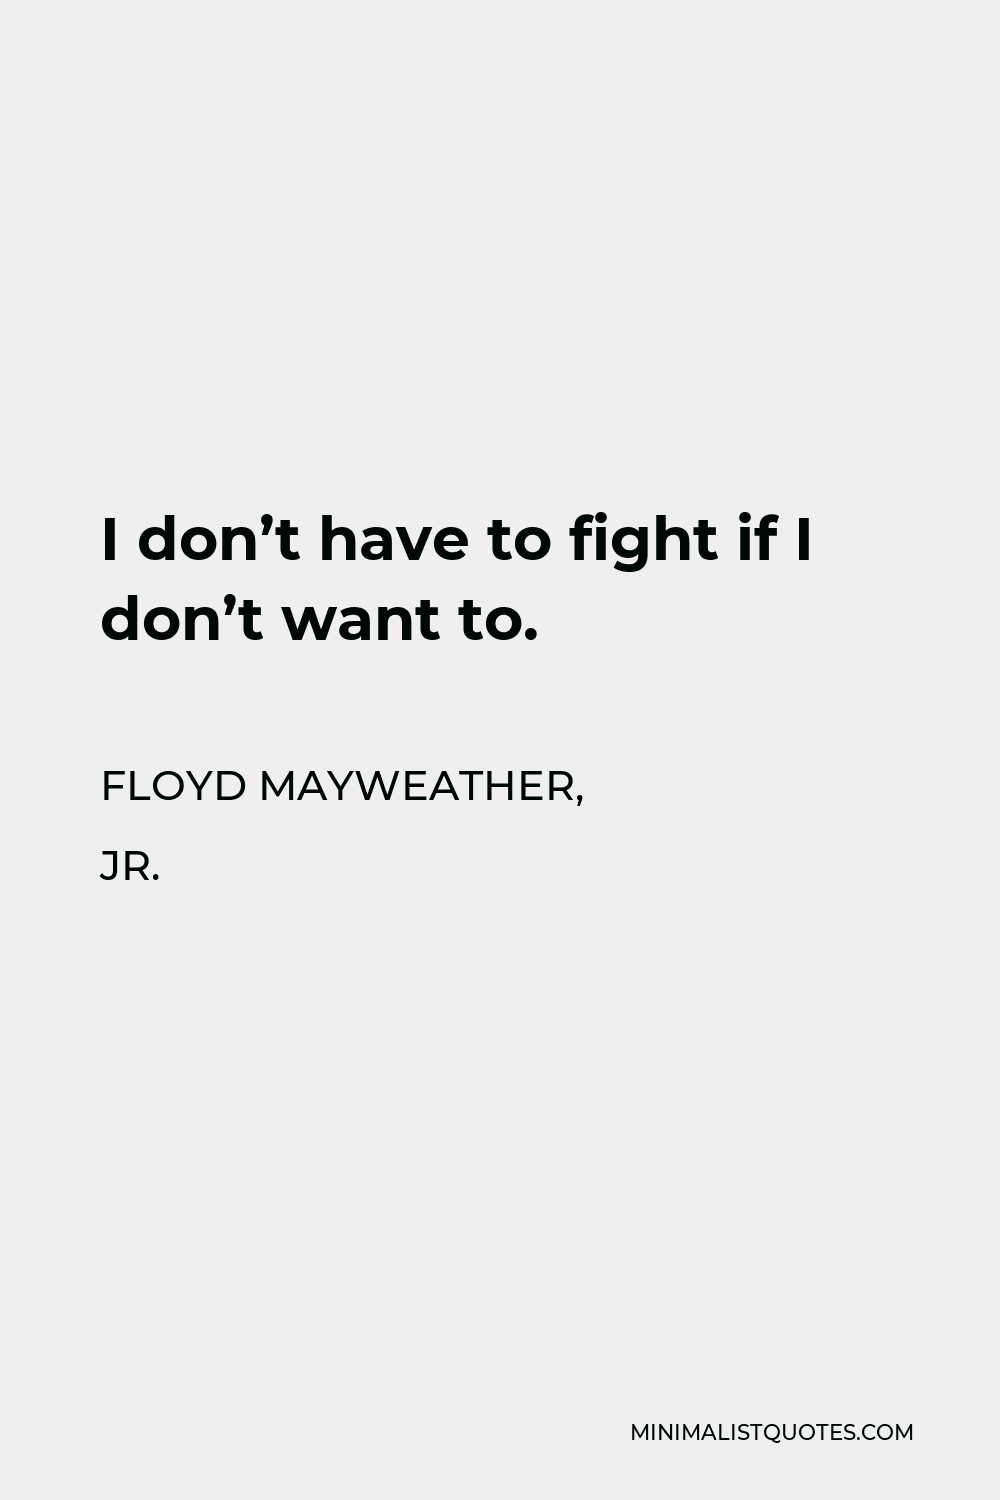 Floyd Mayweather, Jr. Quote - I don’t have to fight if I don’t want to.